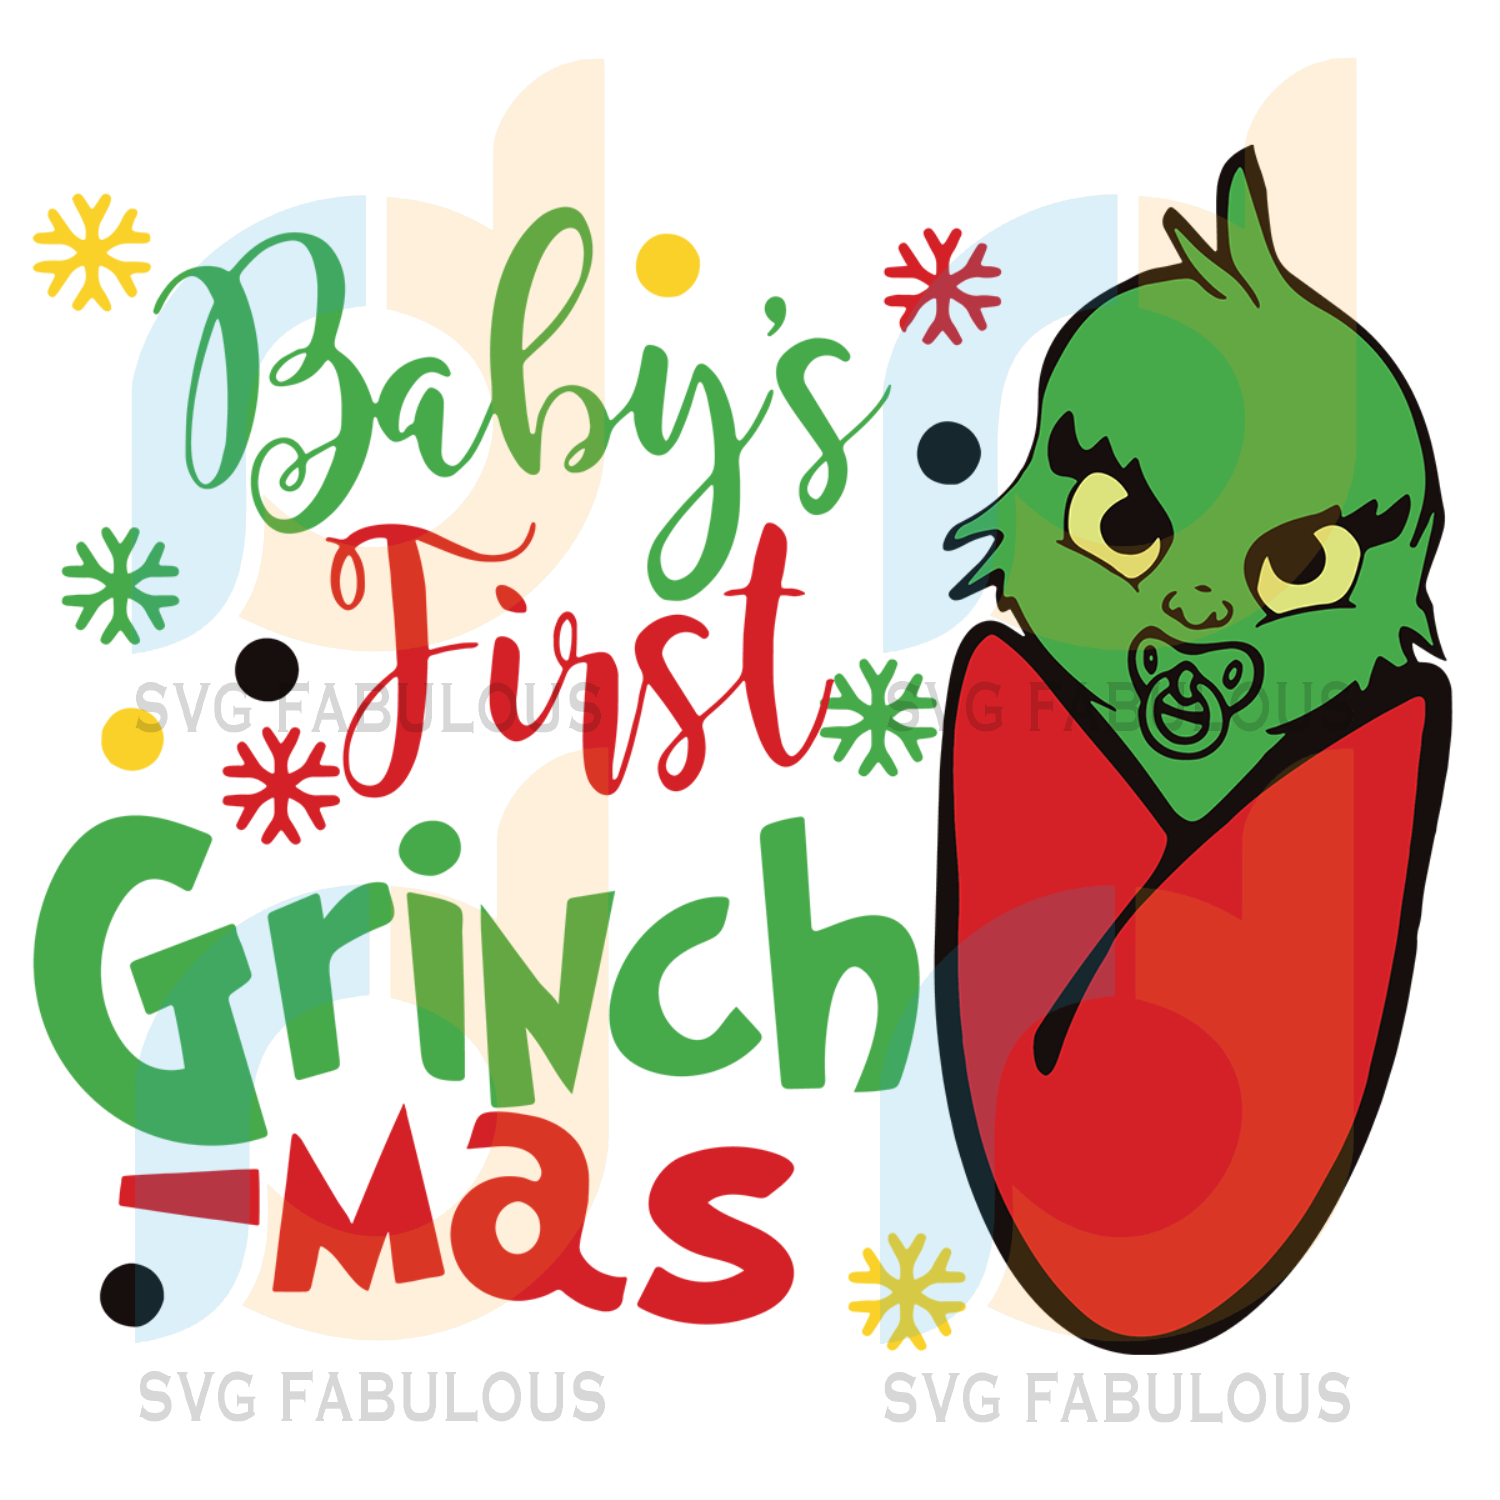 Download Babys First Grinchmas Svg Christmas Svg Xmas Svg Christmas Gift Me Svg Fabulous